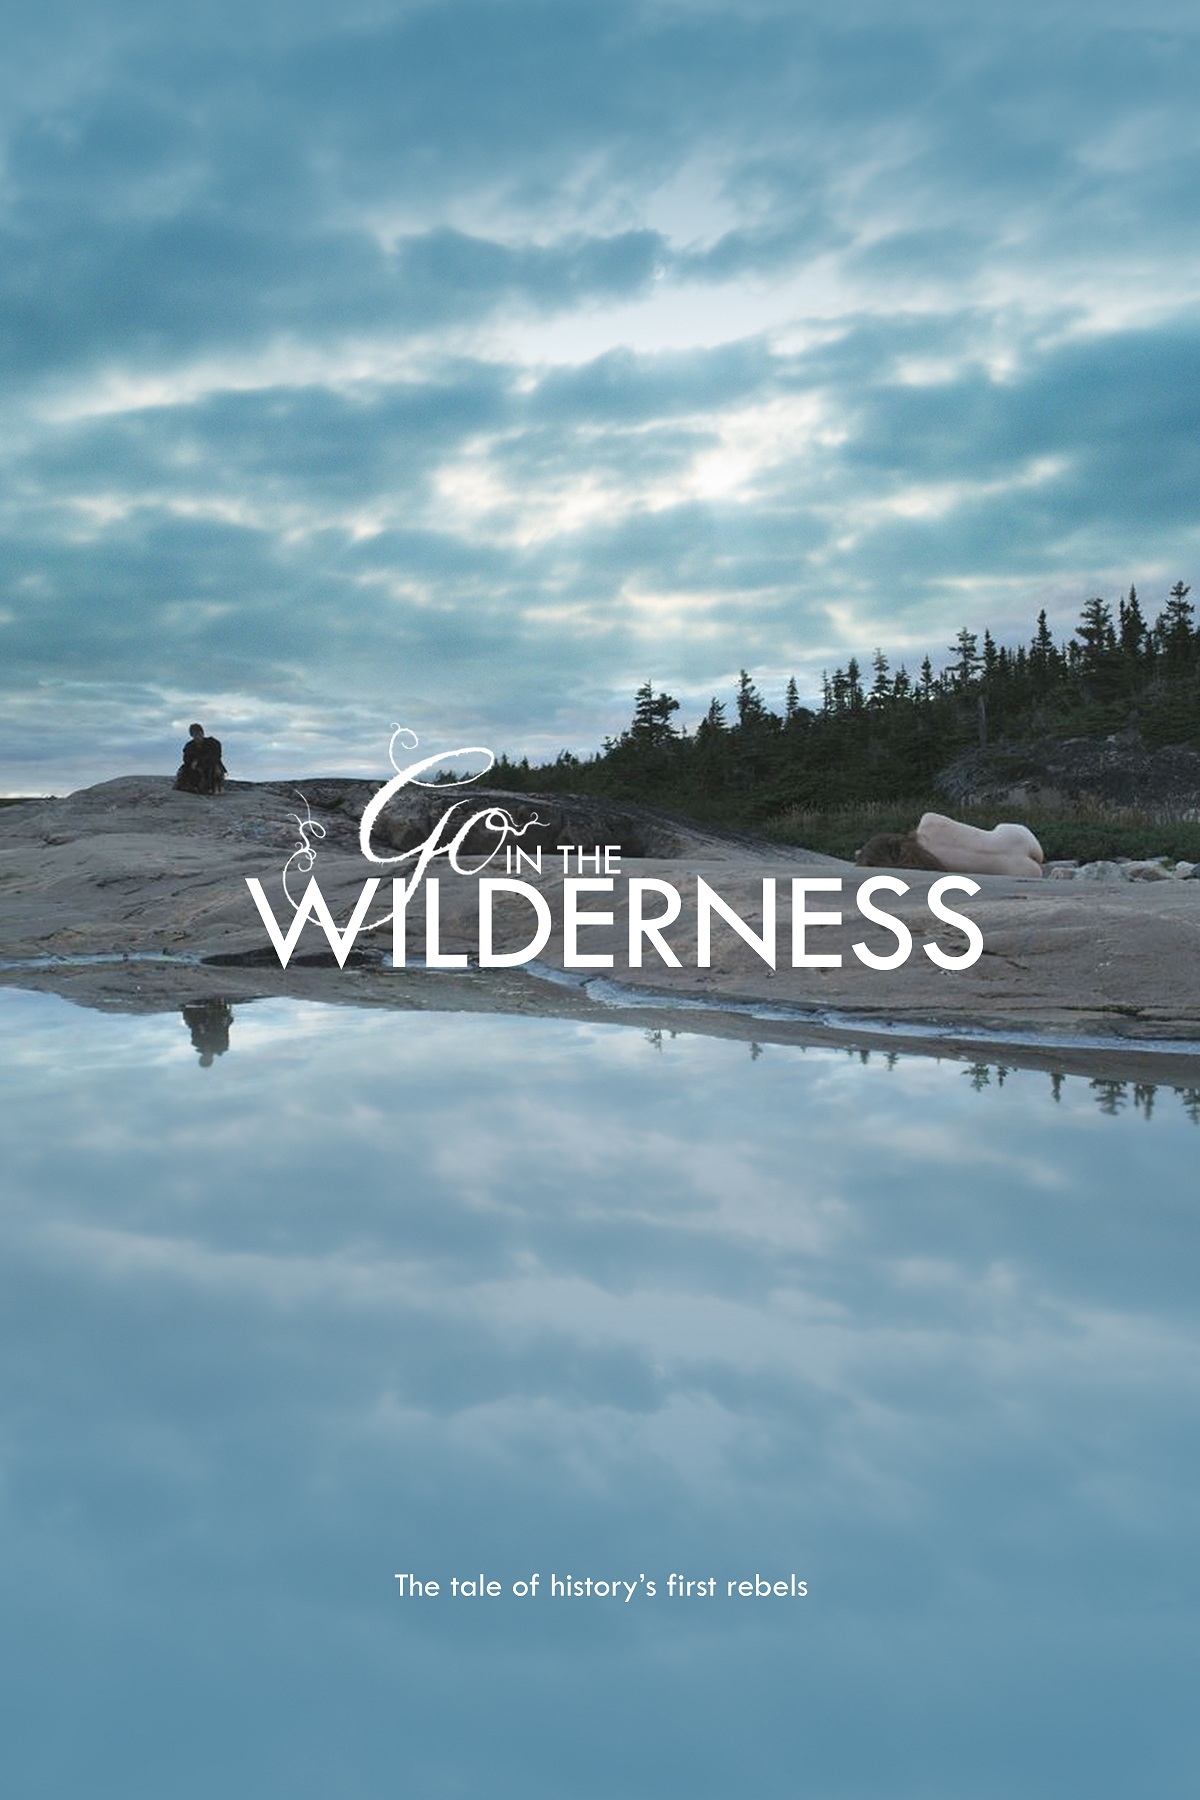 GO IN THE WILDERNESS (2014)